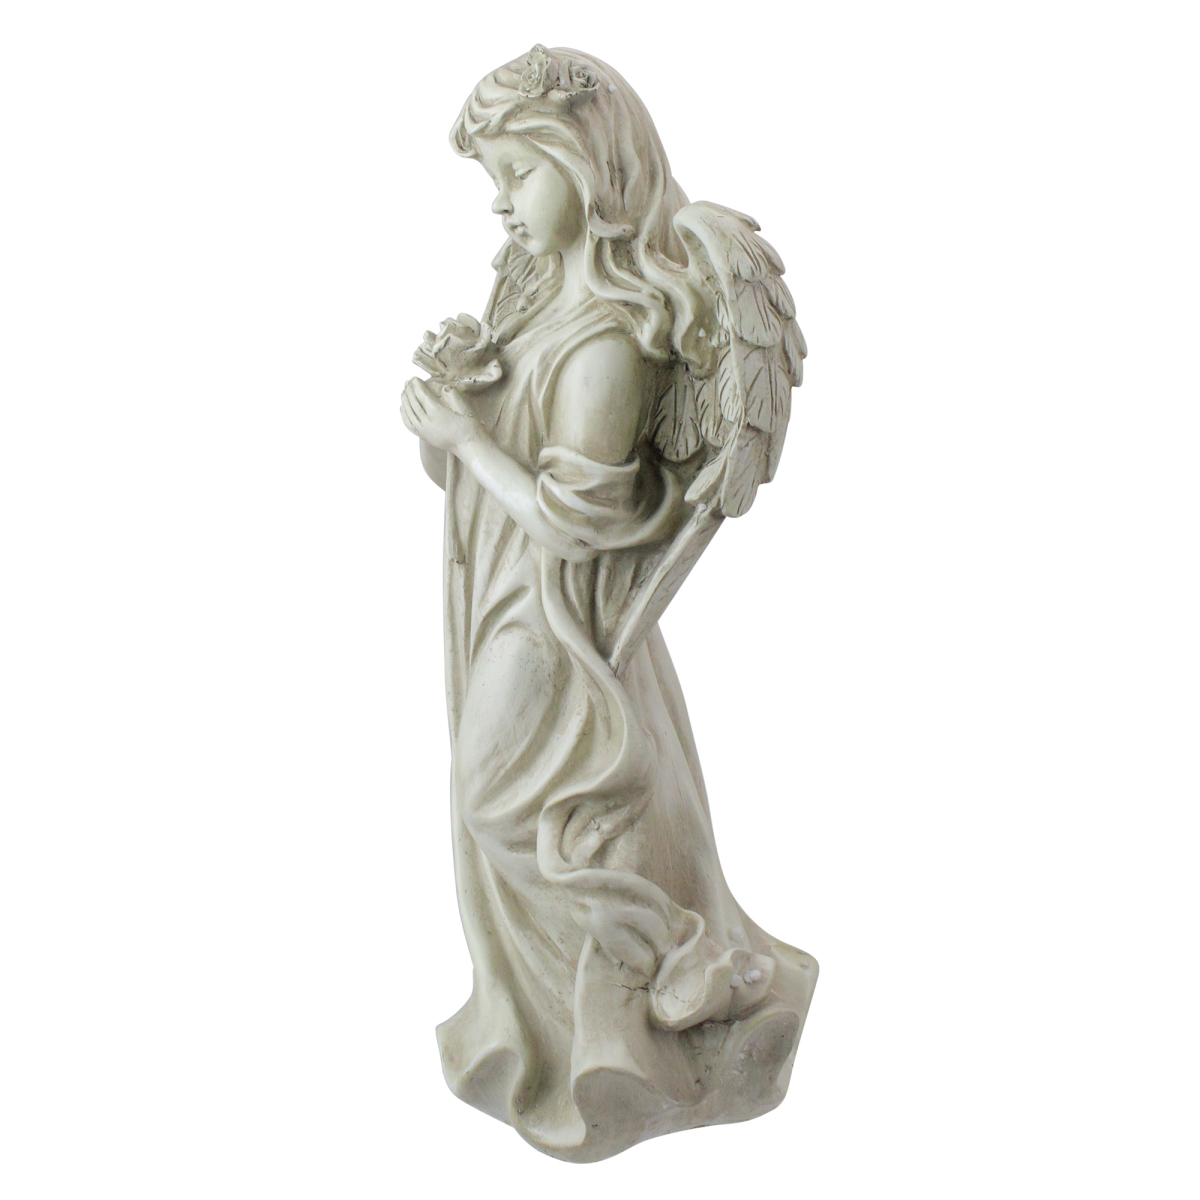 33377759 17 In. Peaceful Angel Holding A Rose Outdoor Garden Statue